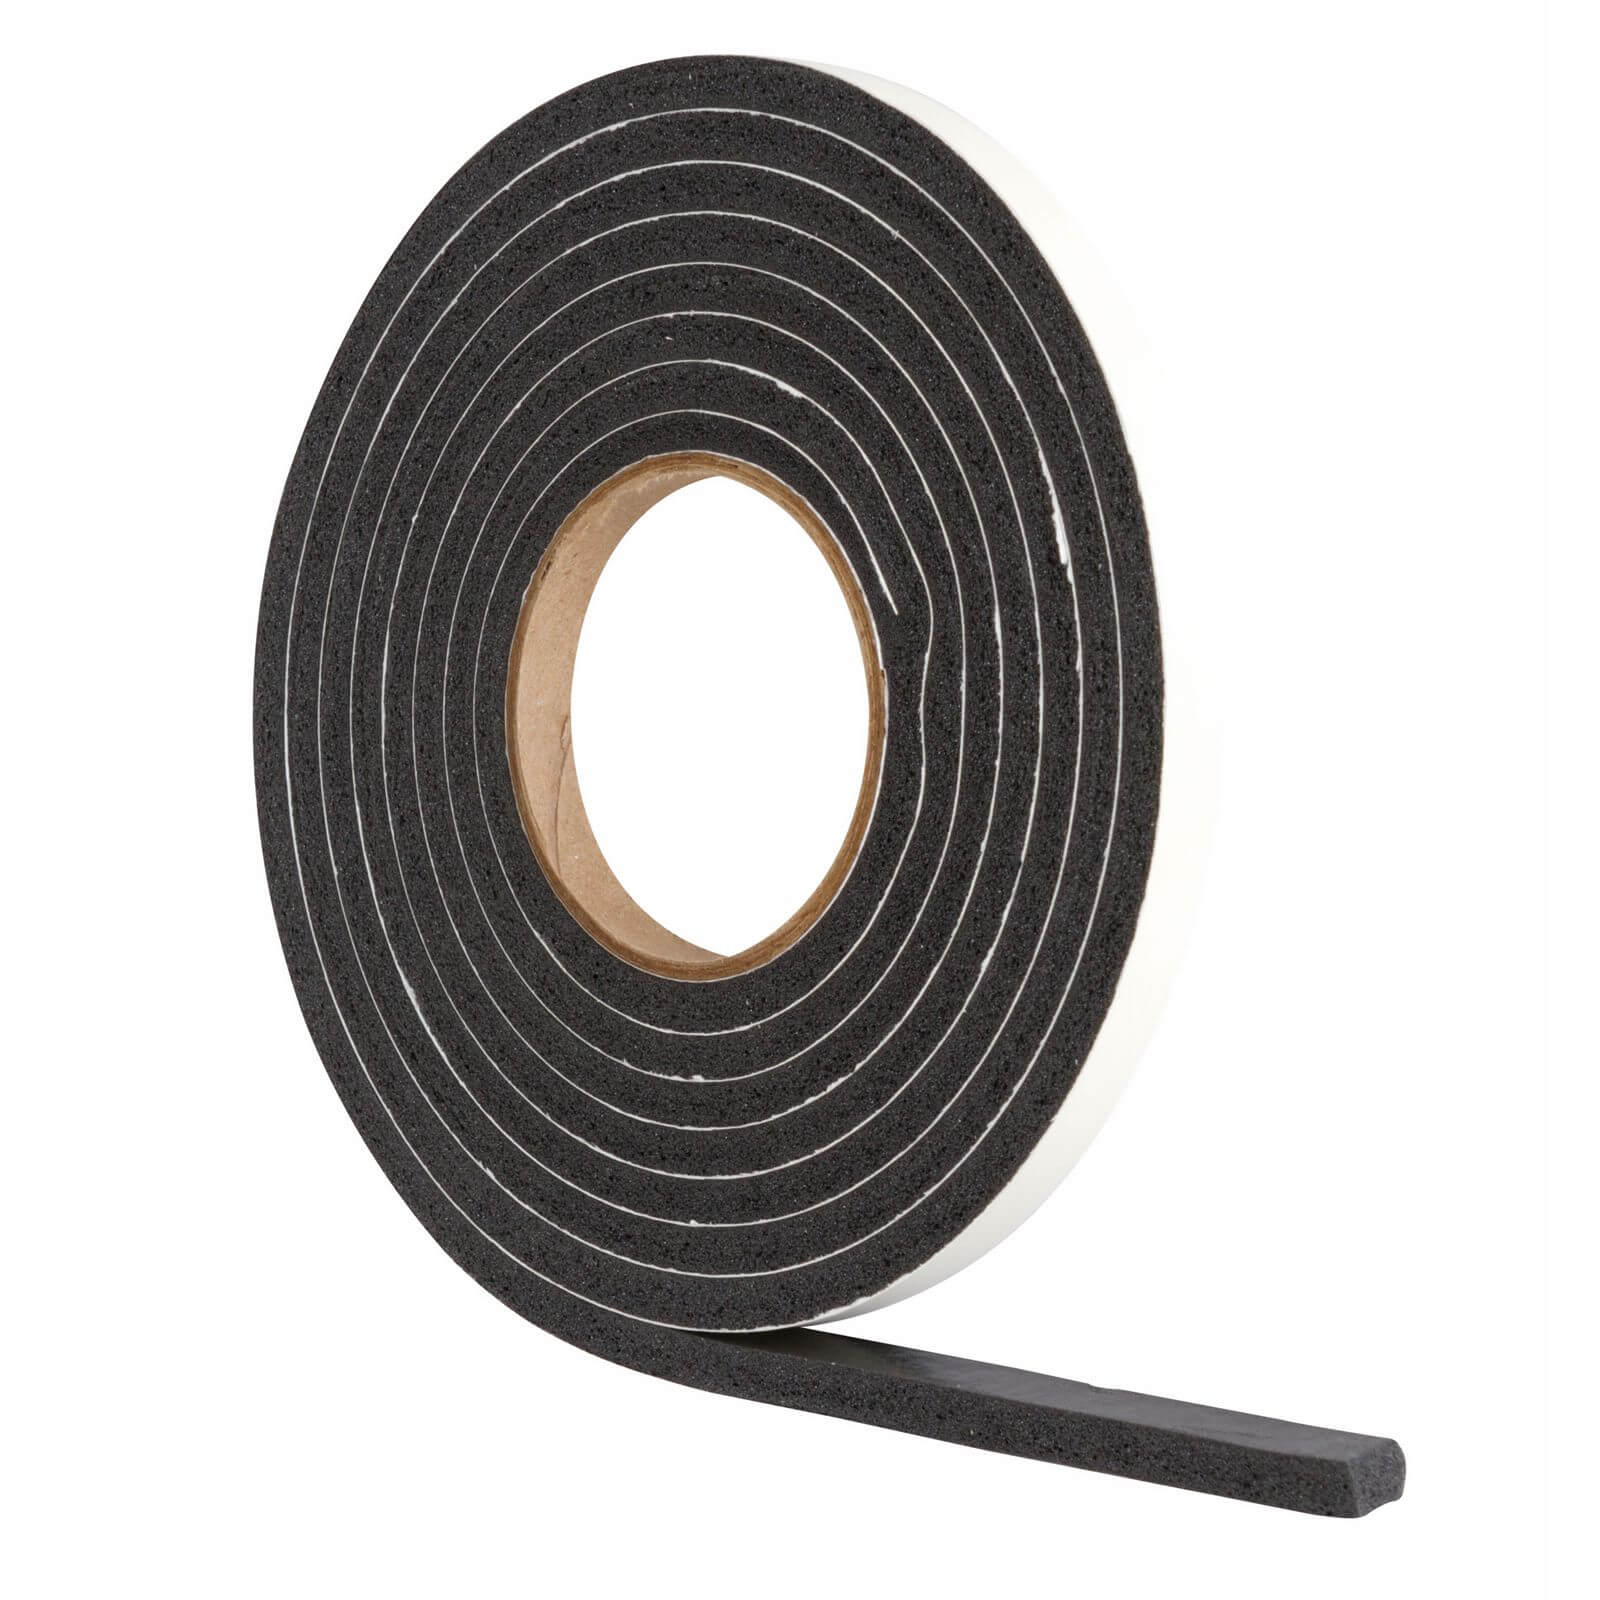 Photo of Extra Thick Foam Seal - Black - 3.5m